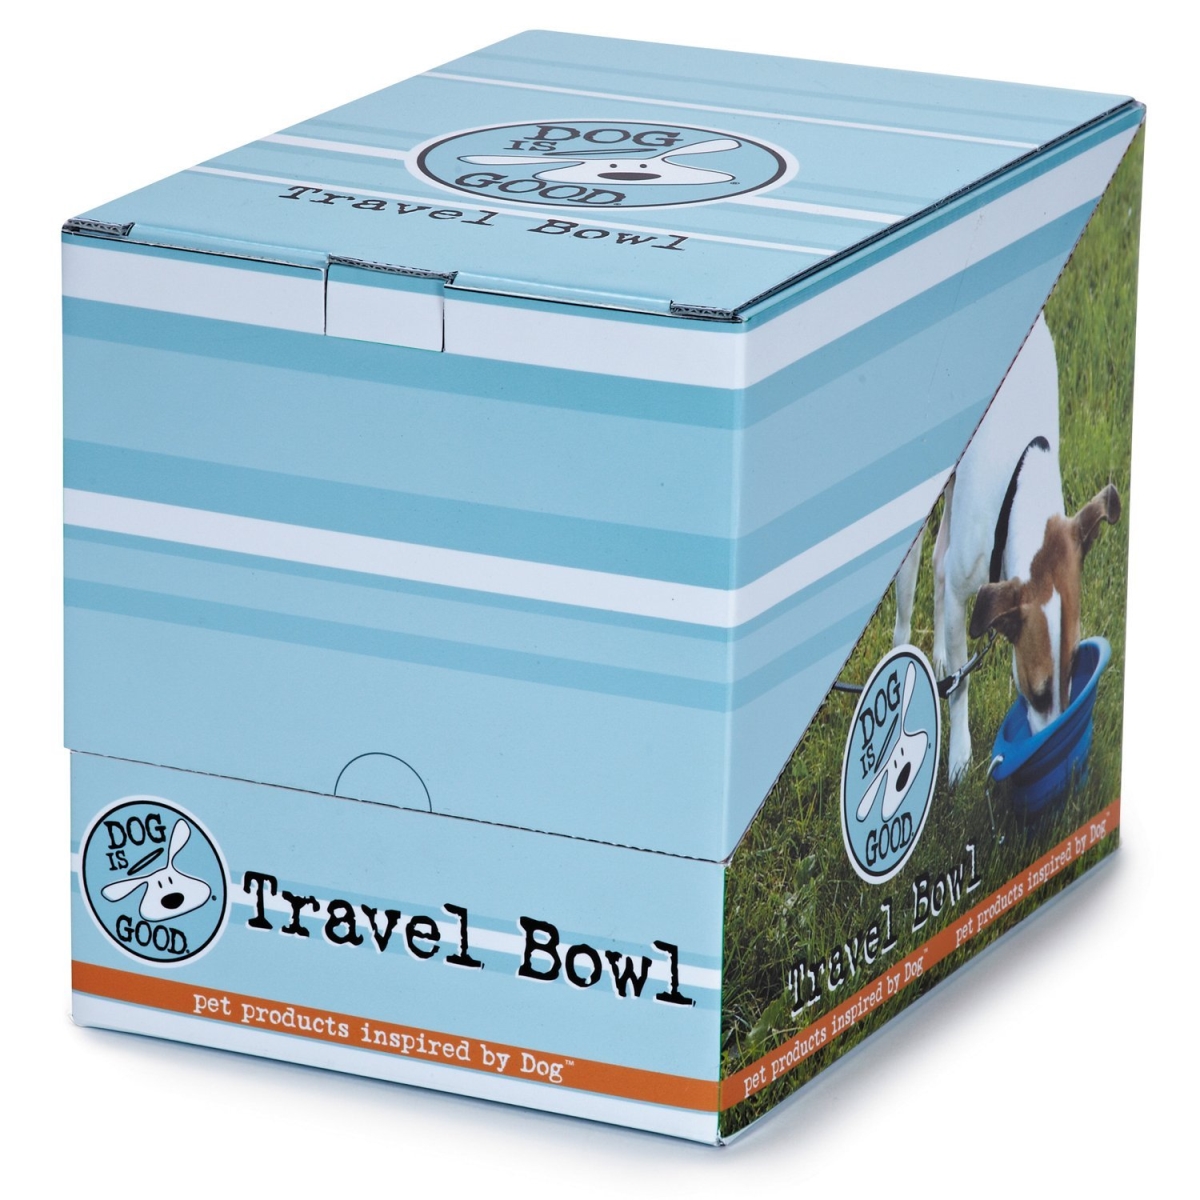 26 Oz Dog Is Good Travel Bowl, Pack Of 8